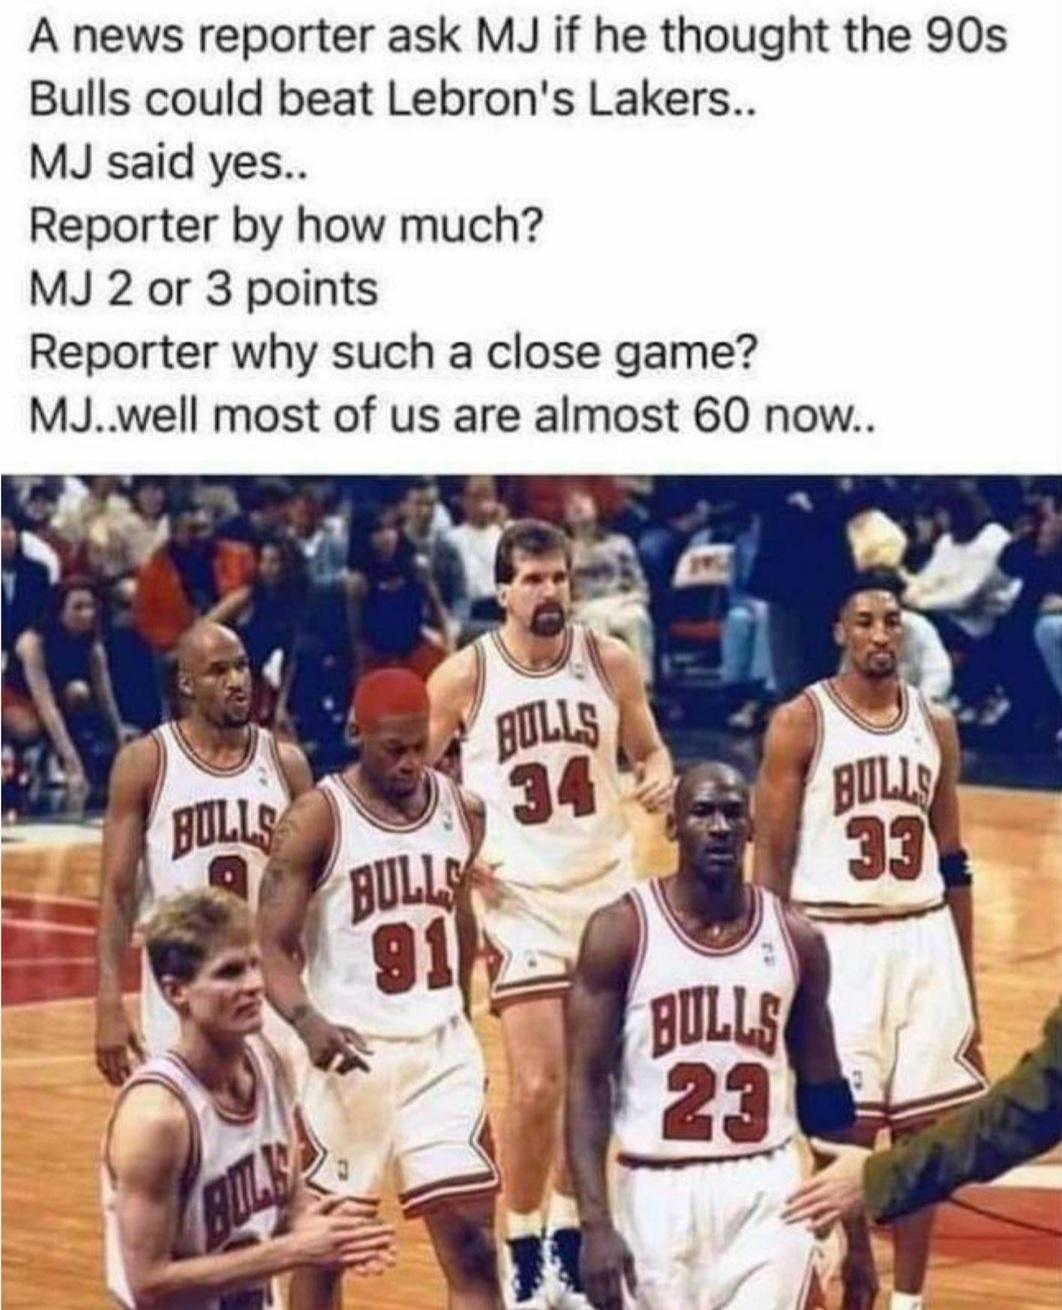 michael jordan - A news reporter ask Mj if he thought the 90s Bulls could beat Lebron's Lakers.. Mj said yes.. Reporter by how much? Mj 2 or 3 points Reporter why such a close game? Mj..well most of us are almost 60 now.. Bulls Bulls Bulls 34 Bulls 33 911